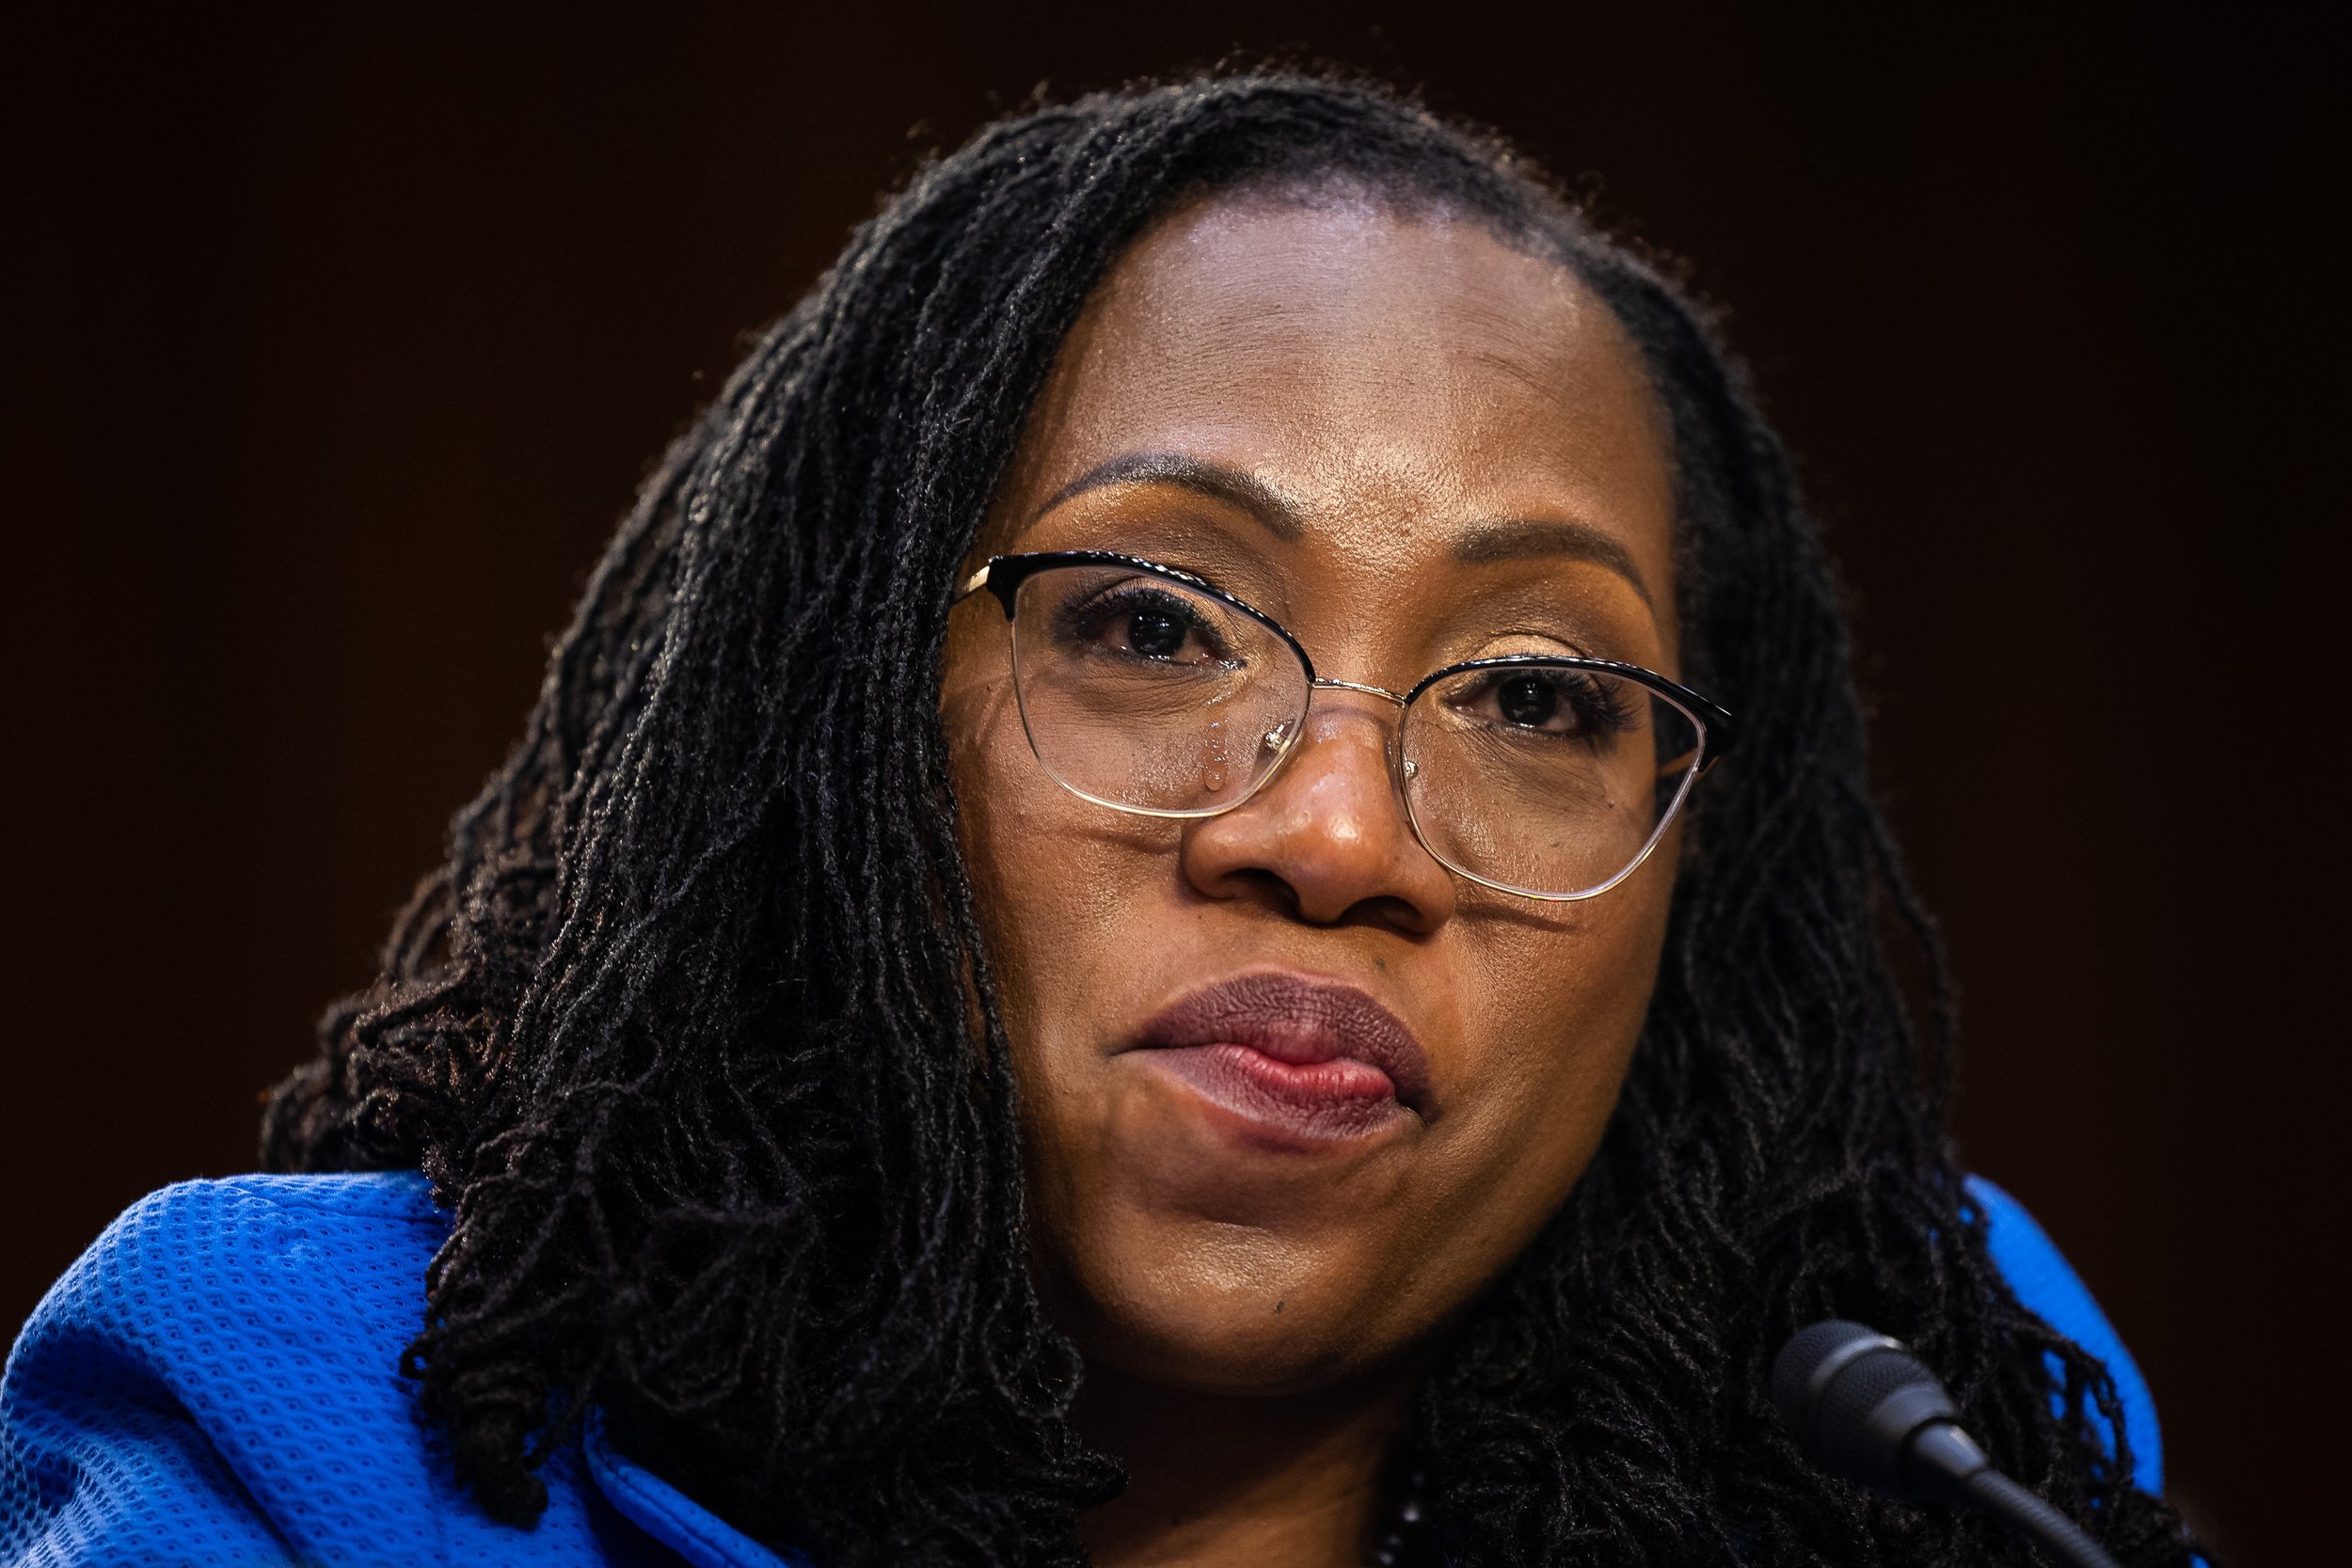  Supreme Court nominee Ketanji Brown Jackson tears up while a senator discusses the historic nature of her candidacy during her confirmation hearing on Capitol Hill March 23, 2022. 